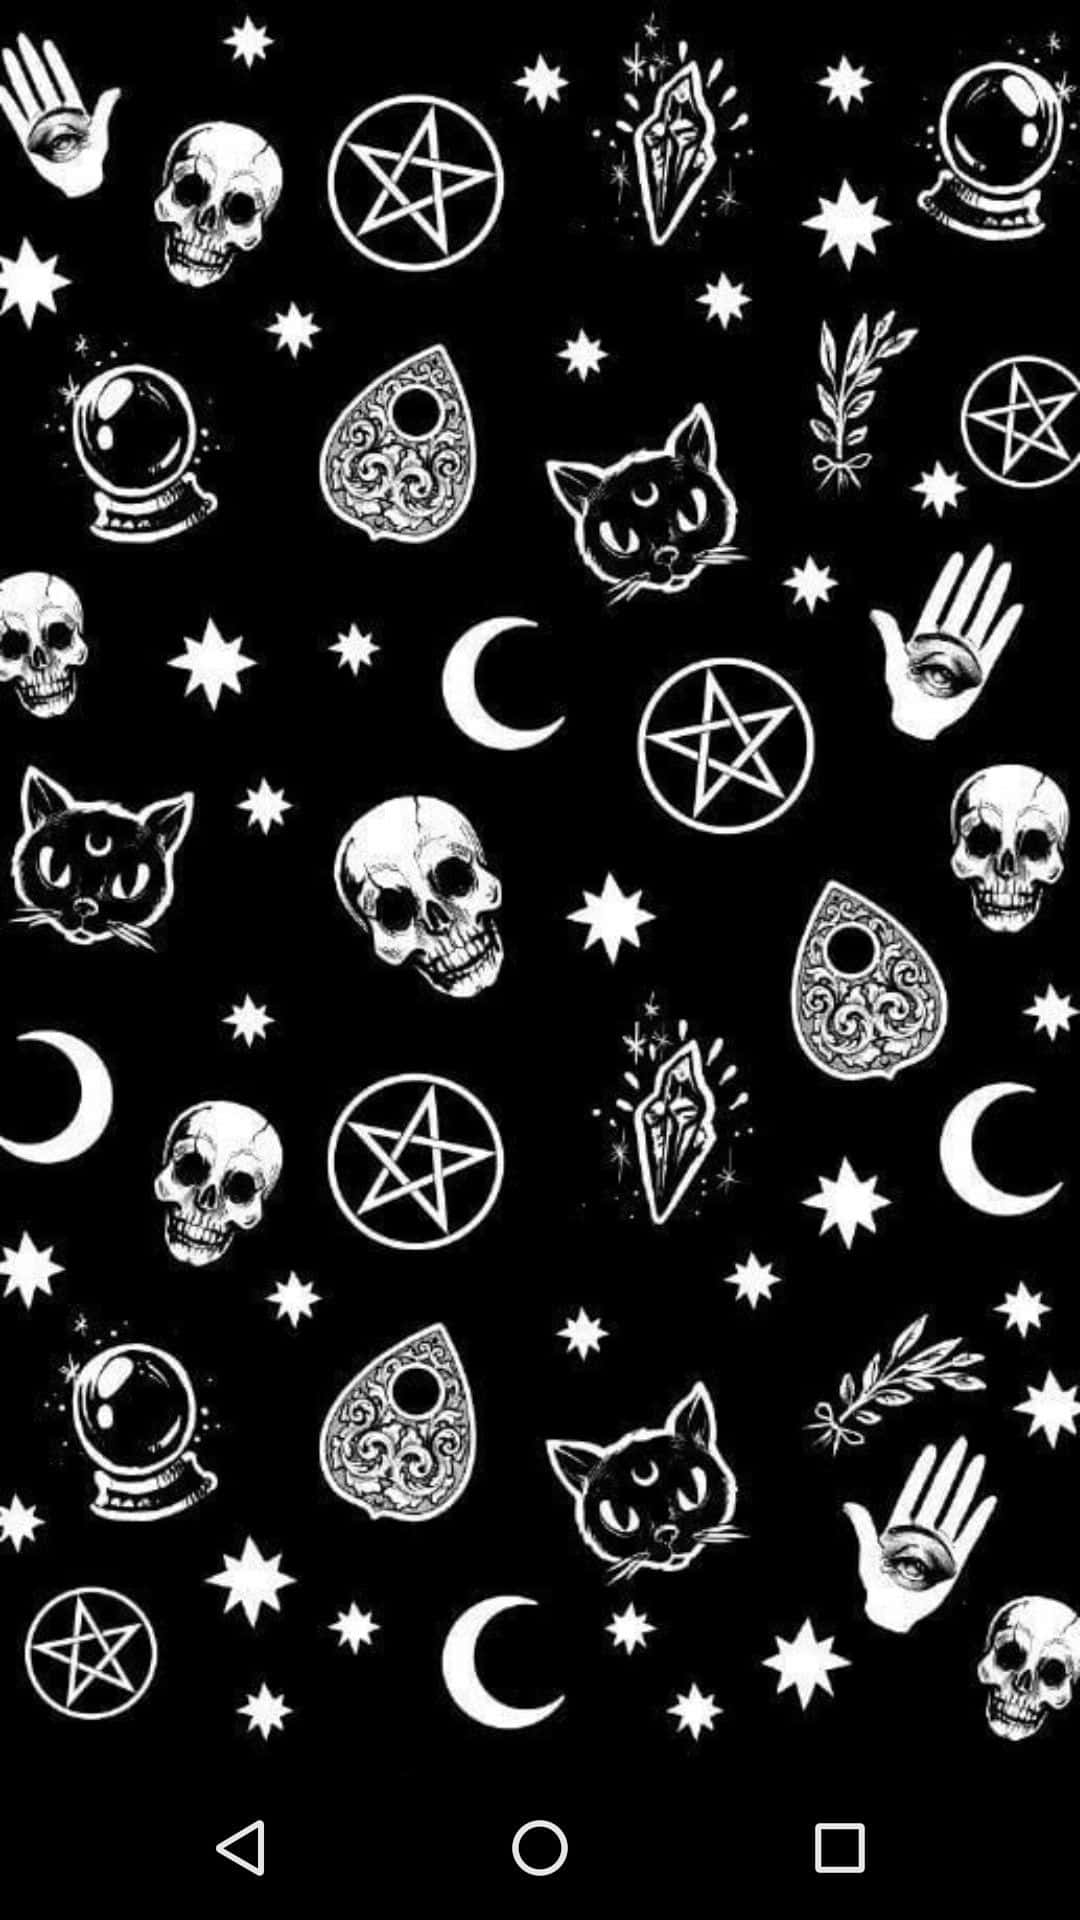 Embrace the dark with a Gothic iPhone Wallpaper